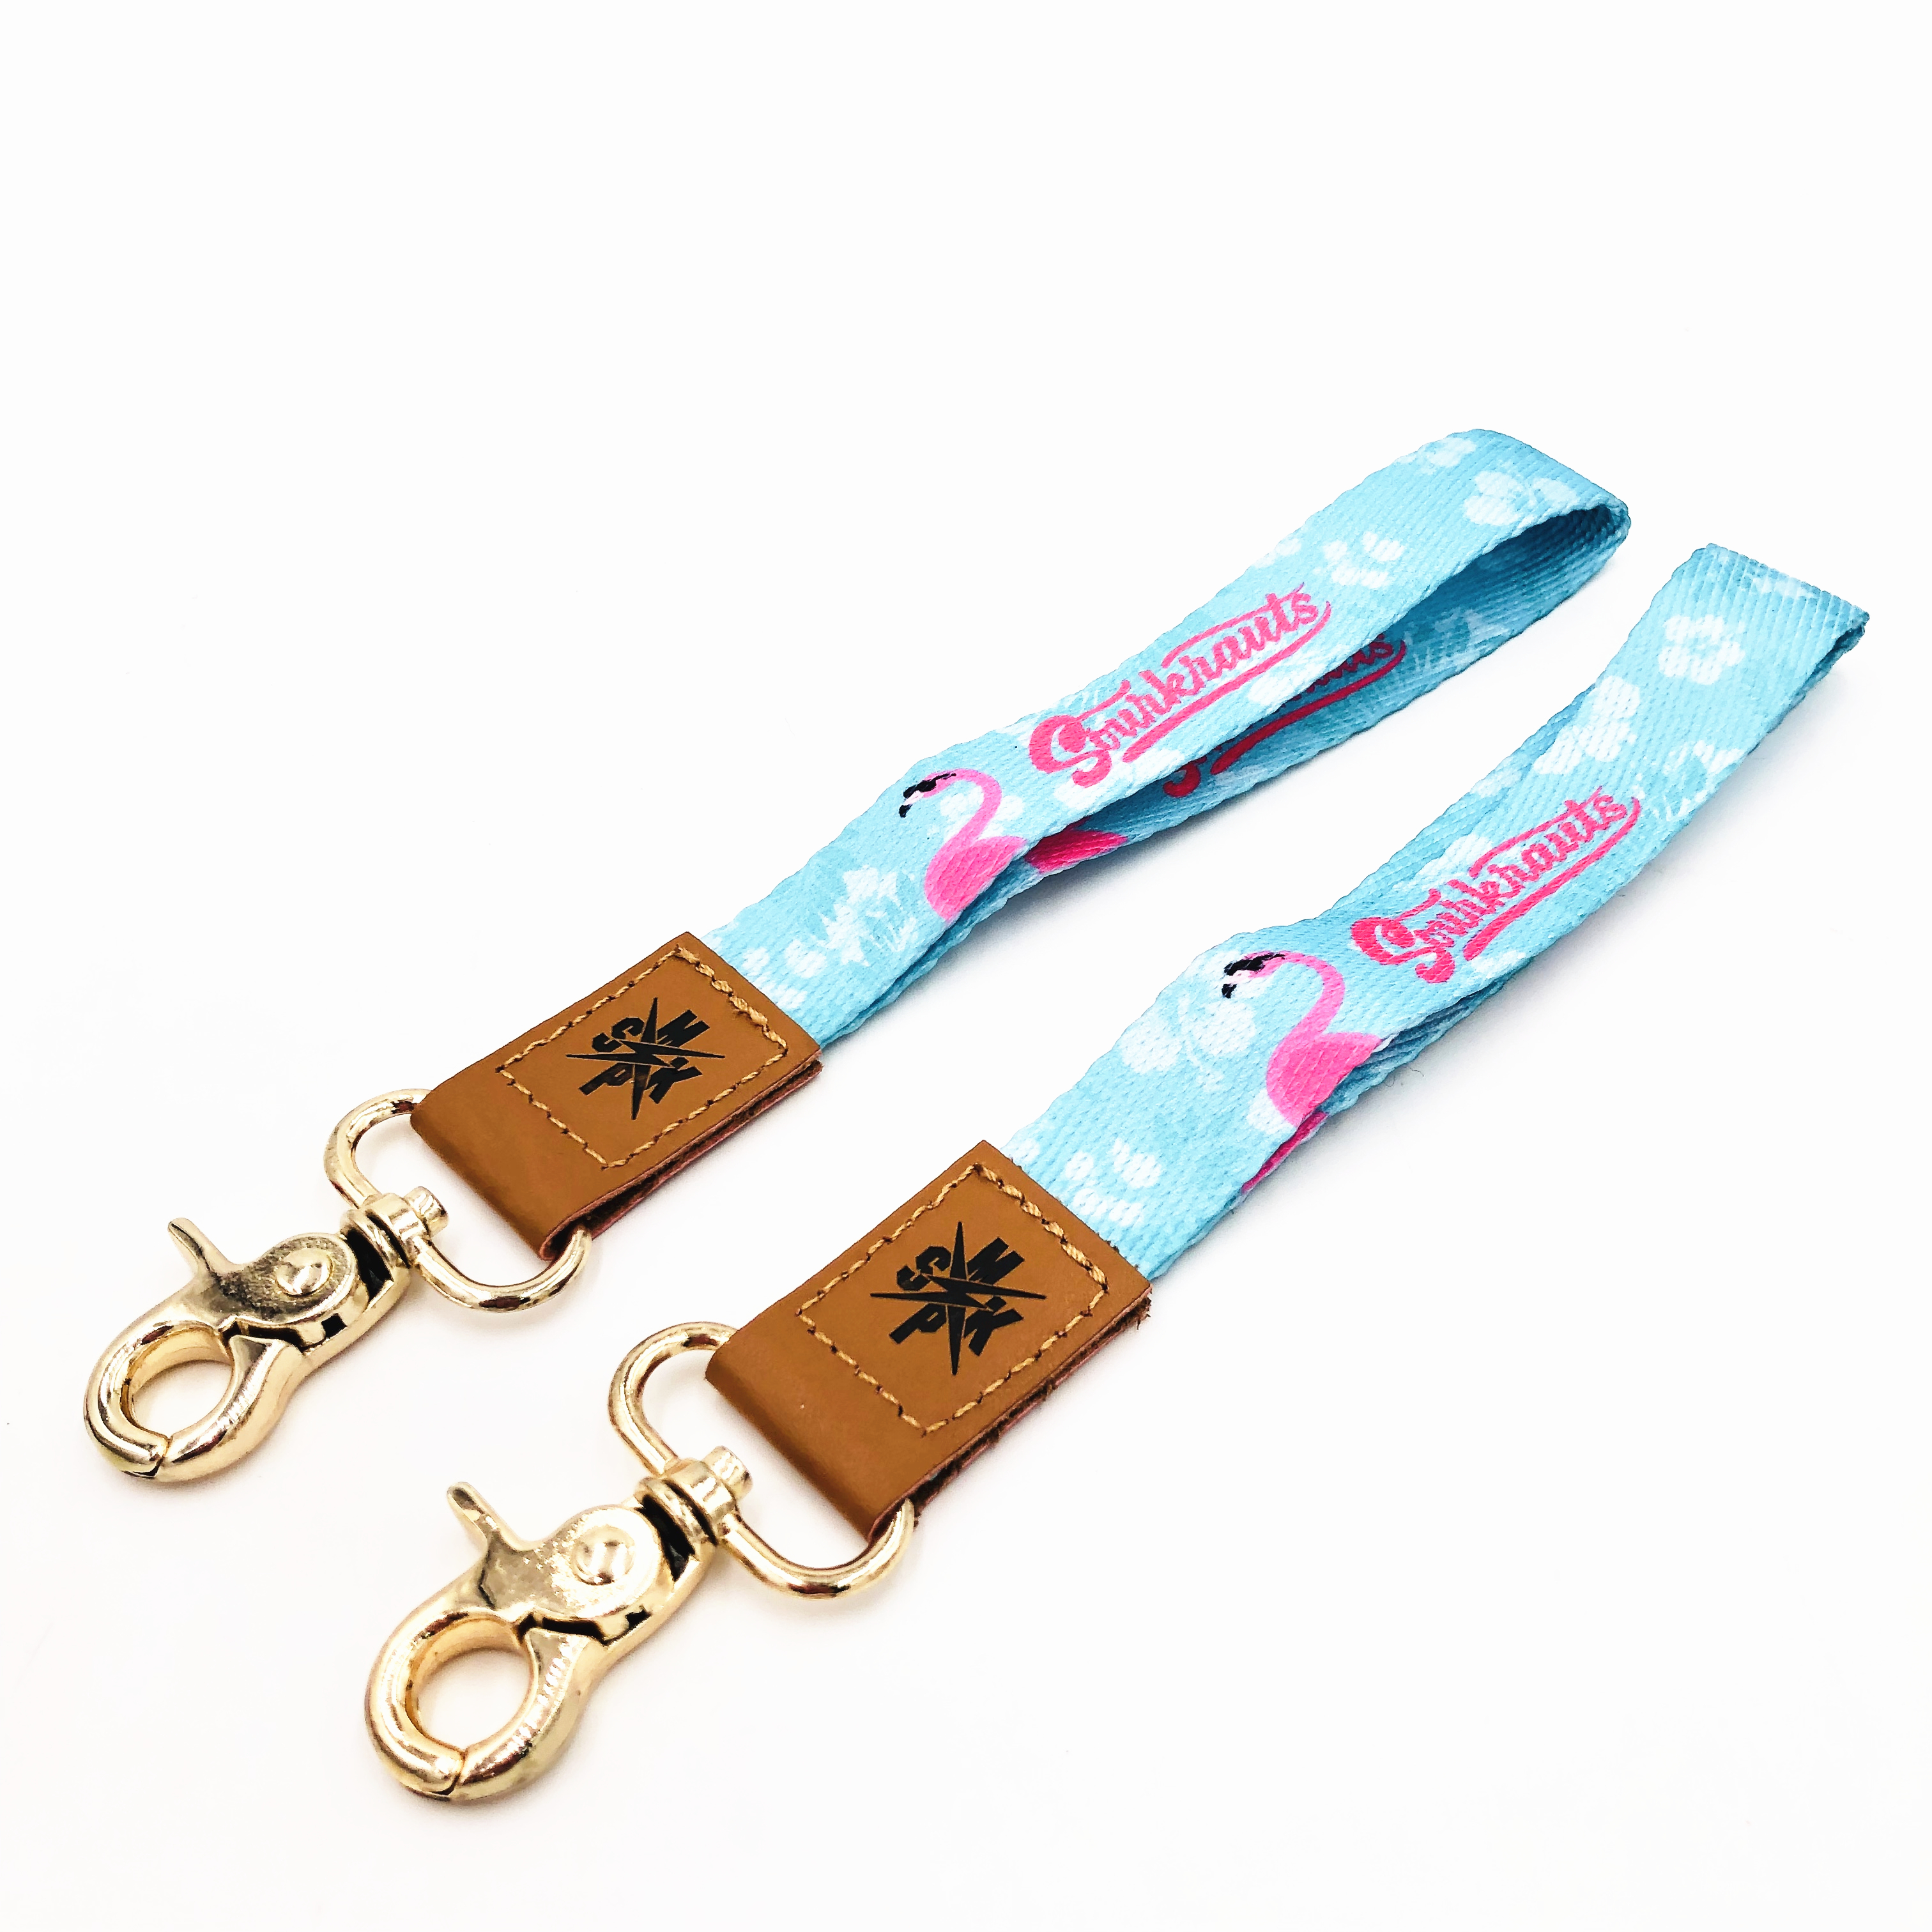 Premium Quality Wristlet Strap with Metal Clasp and Genuine Leather Hand Wrist Lanyard